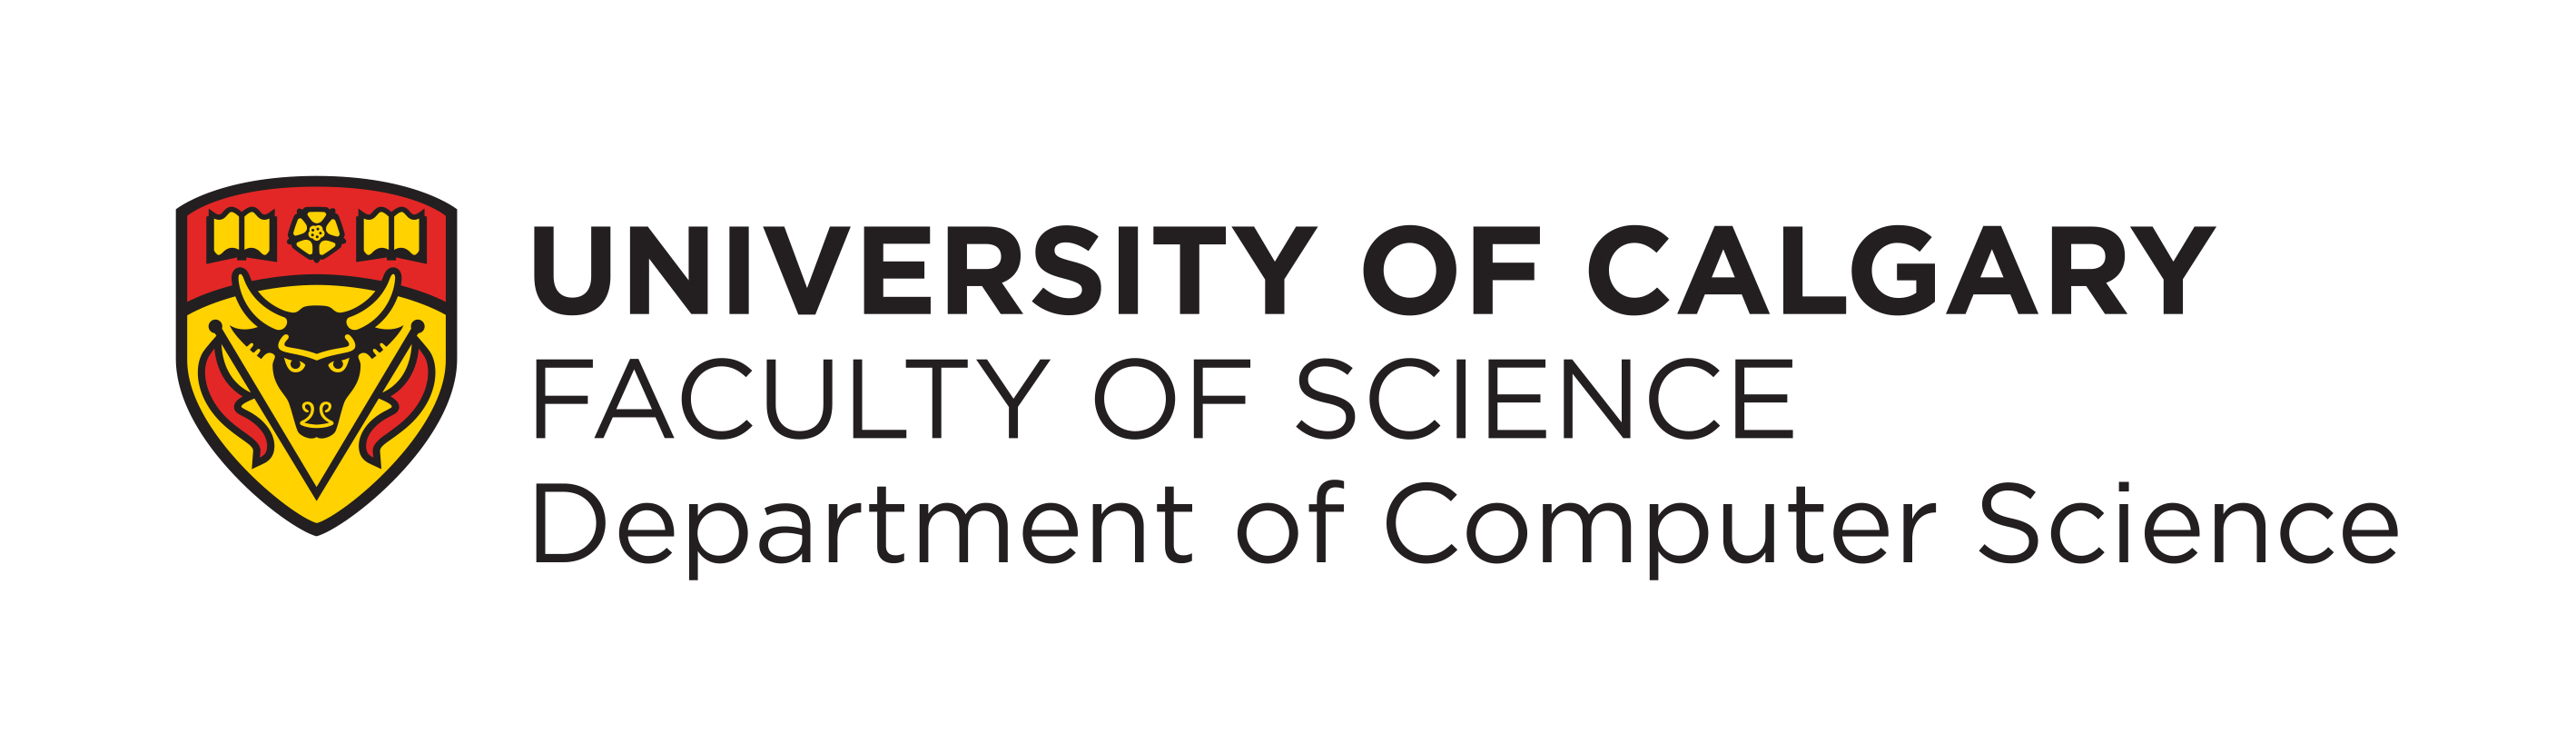 University of Calgary - Department of Computer Science